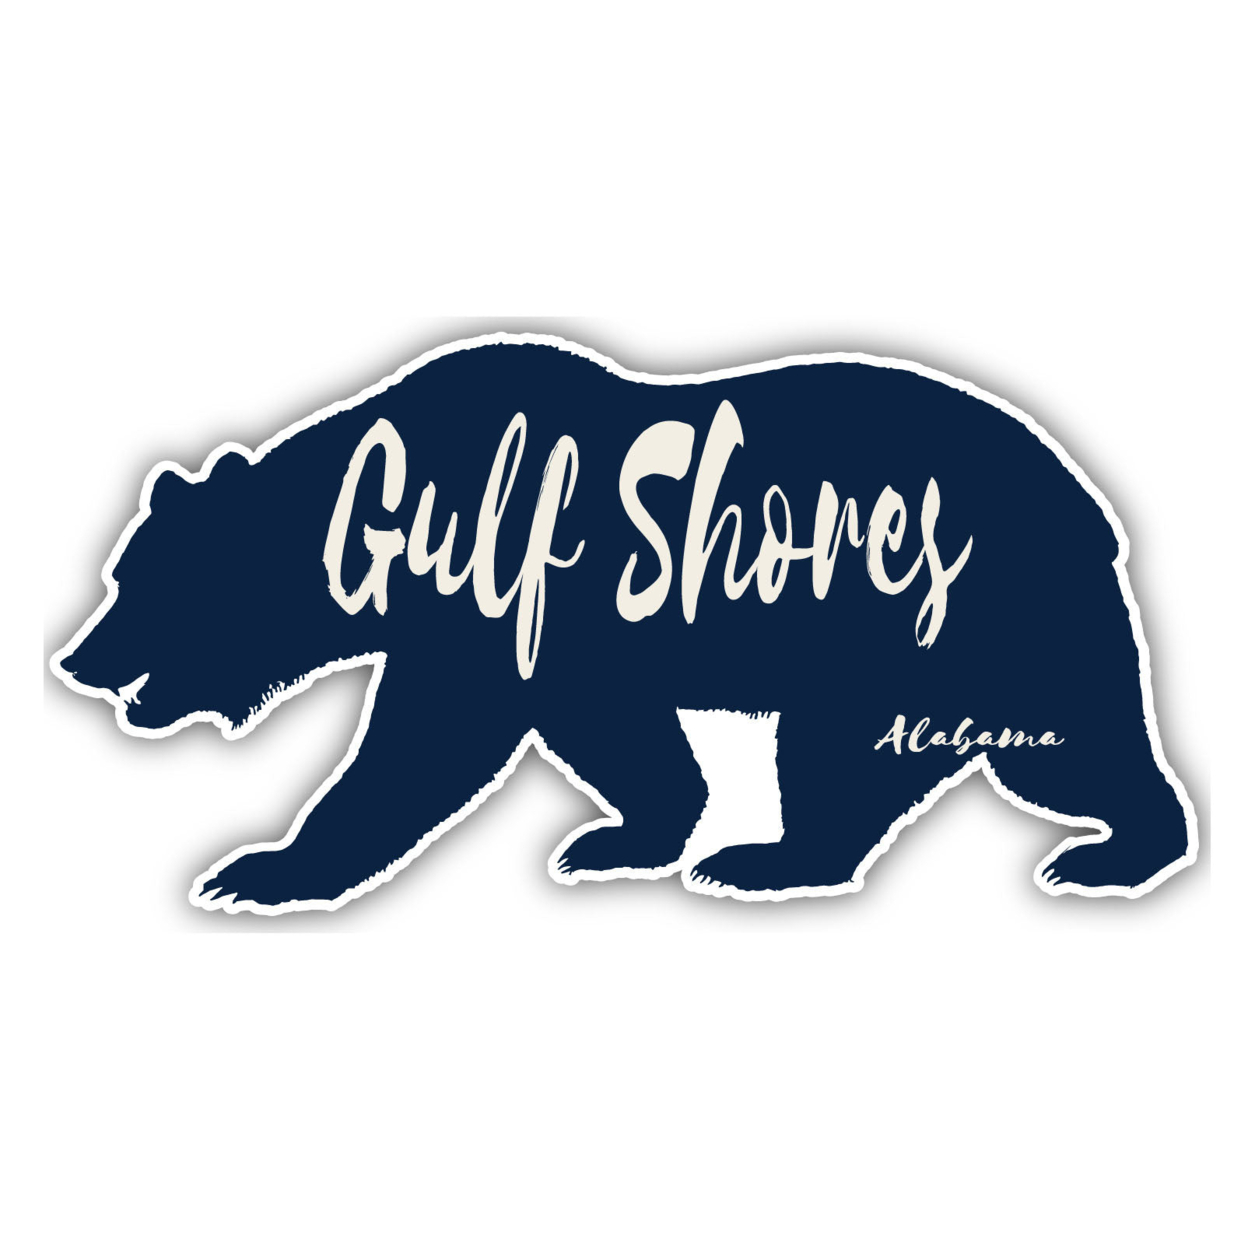 Gulf Shores Alabama Souvenir Decorative Stickers (Choose Theme And Size) - 4-Pack, 2-Inch, Camp Life